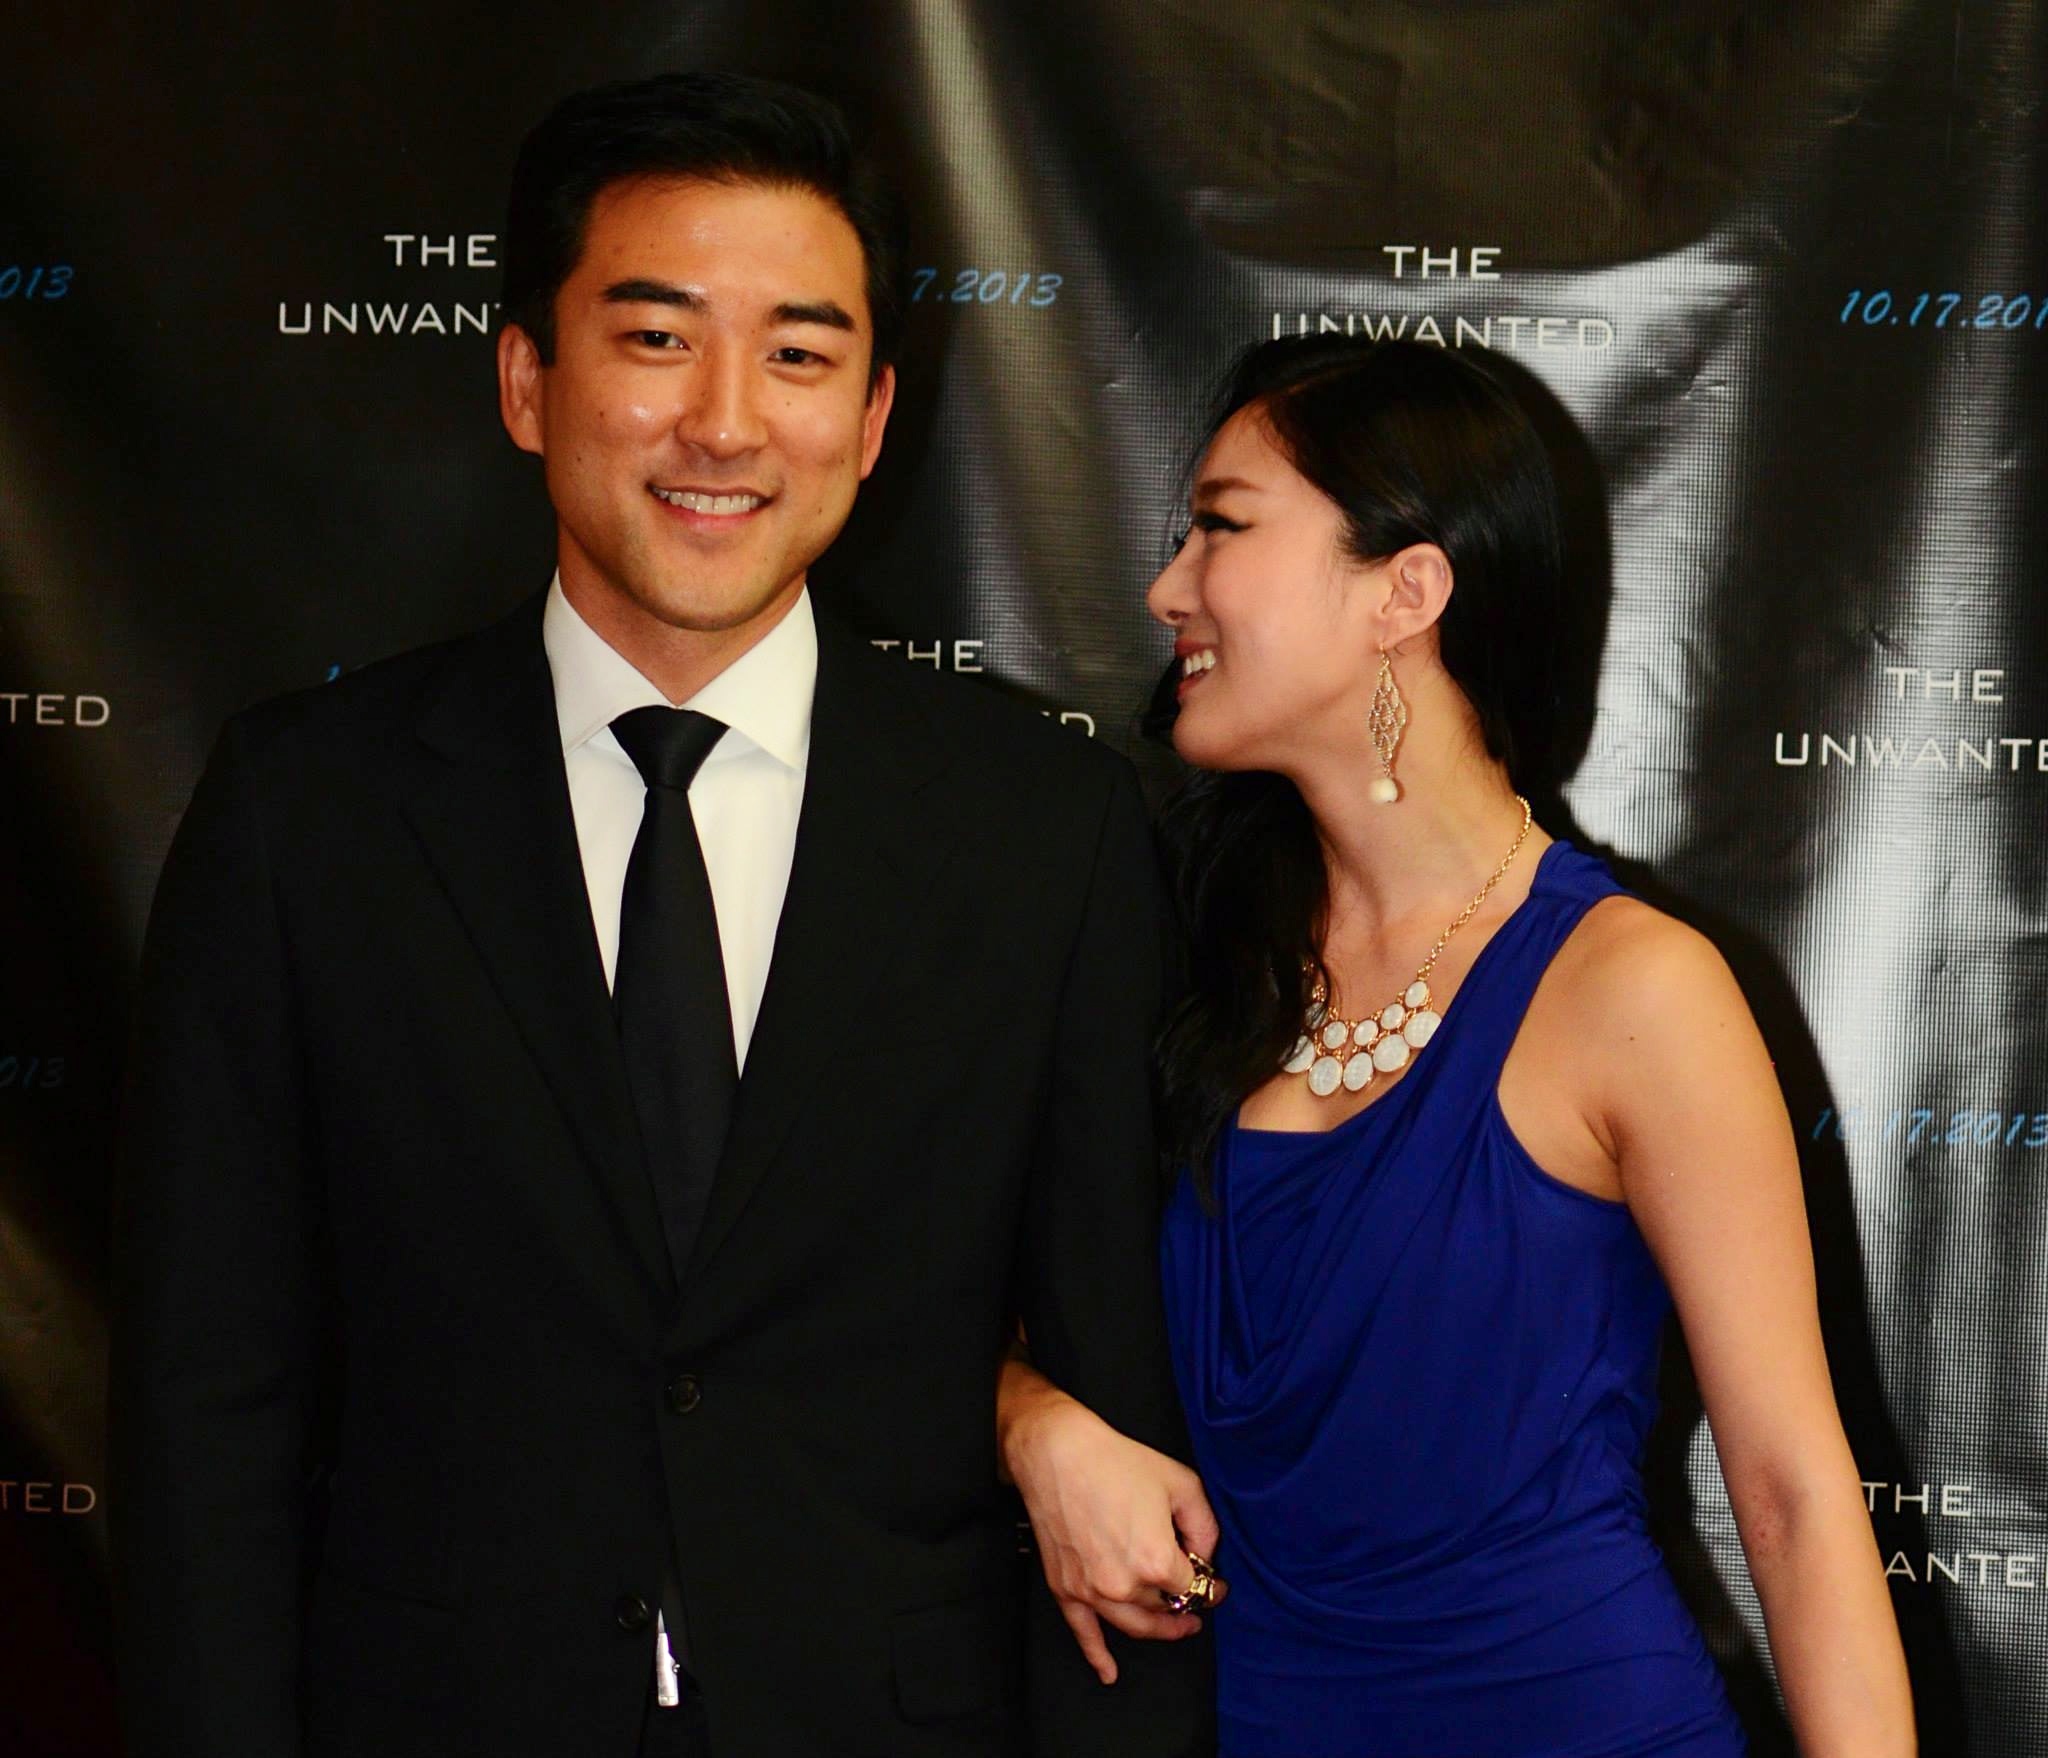 The Unwanted Premiere, Lincoln Center, 2014.